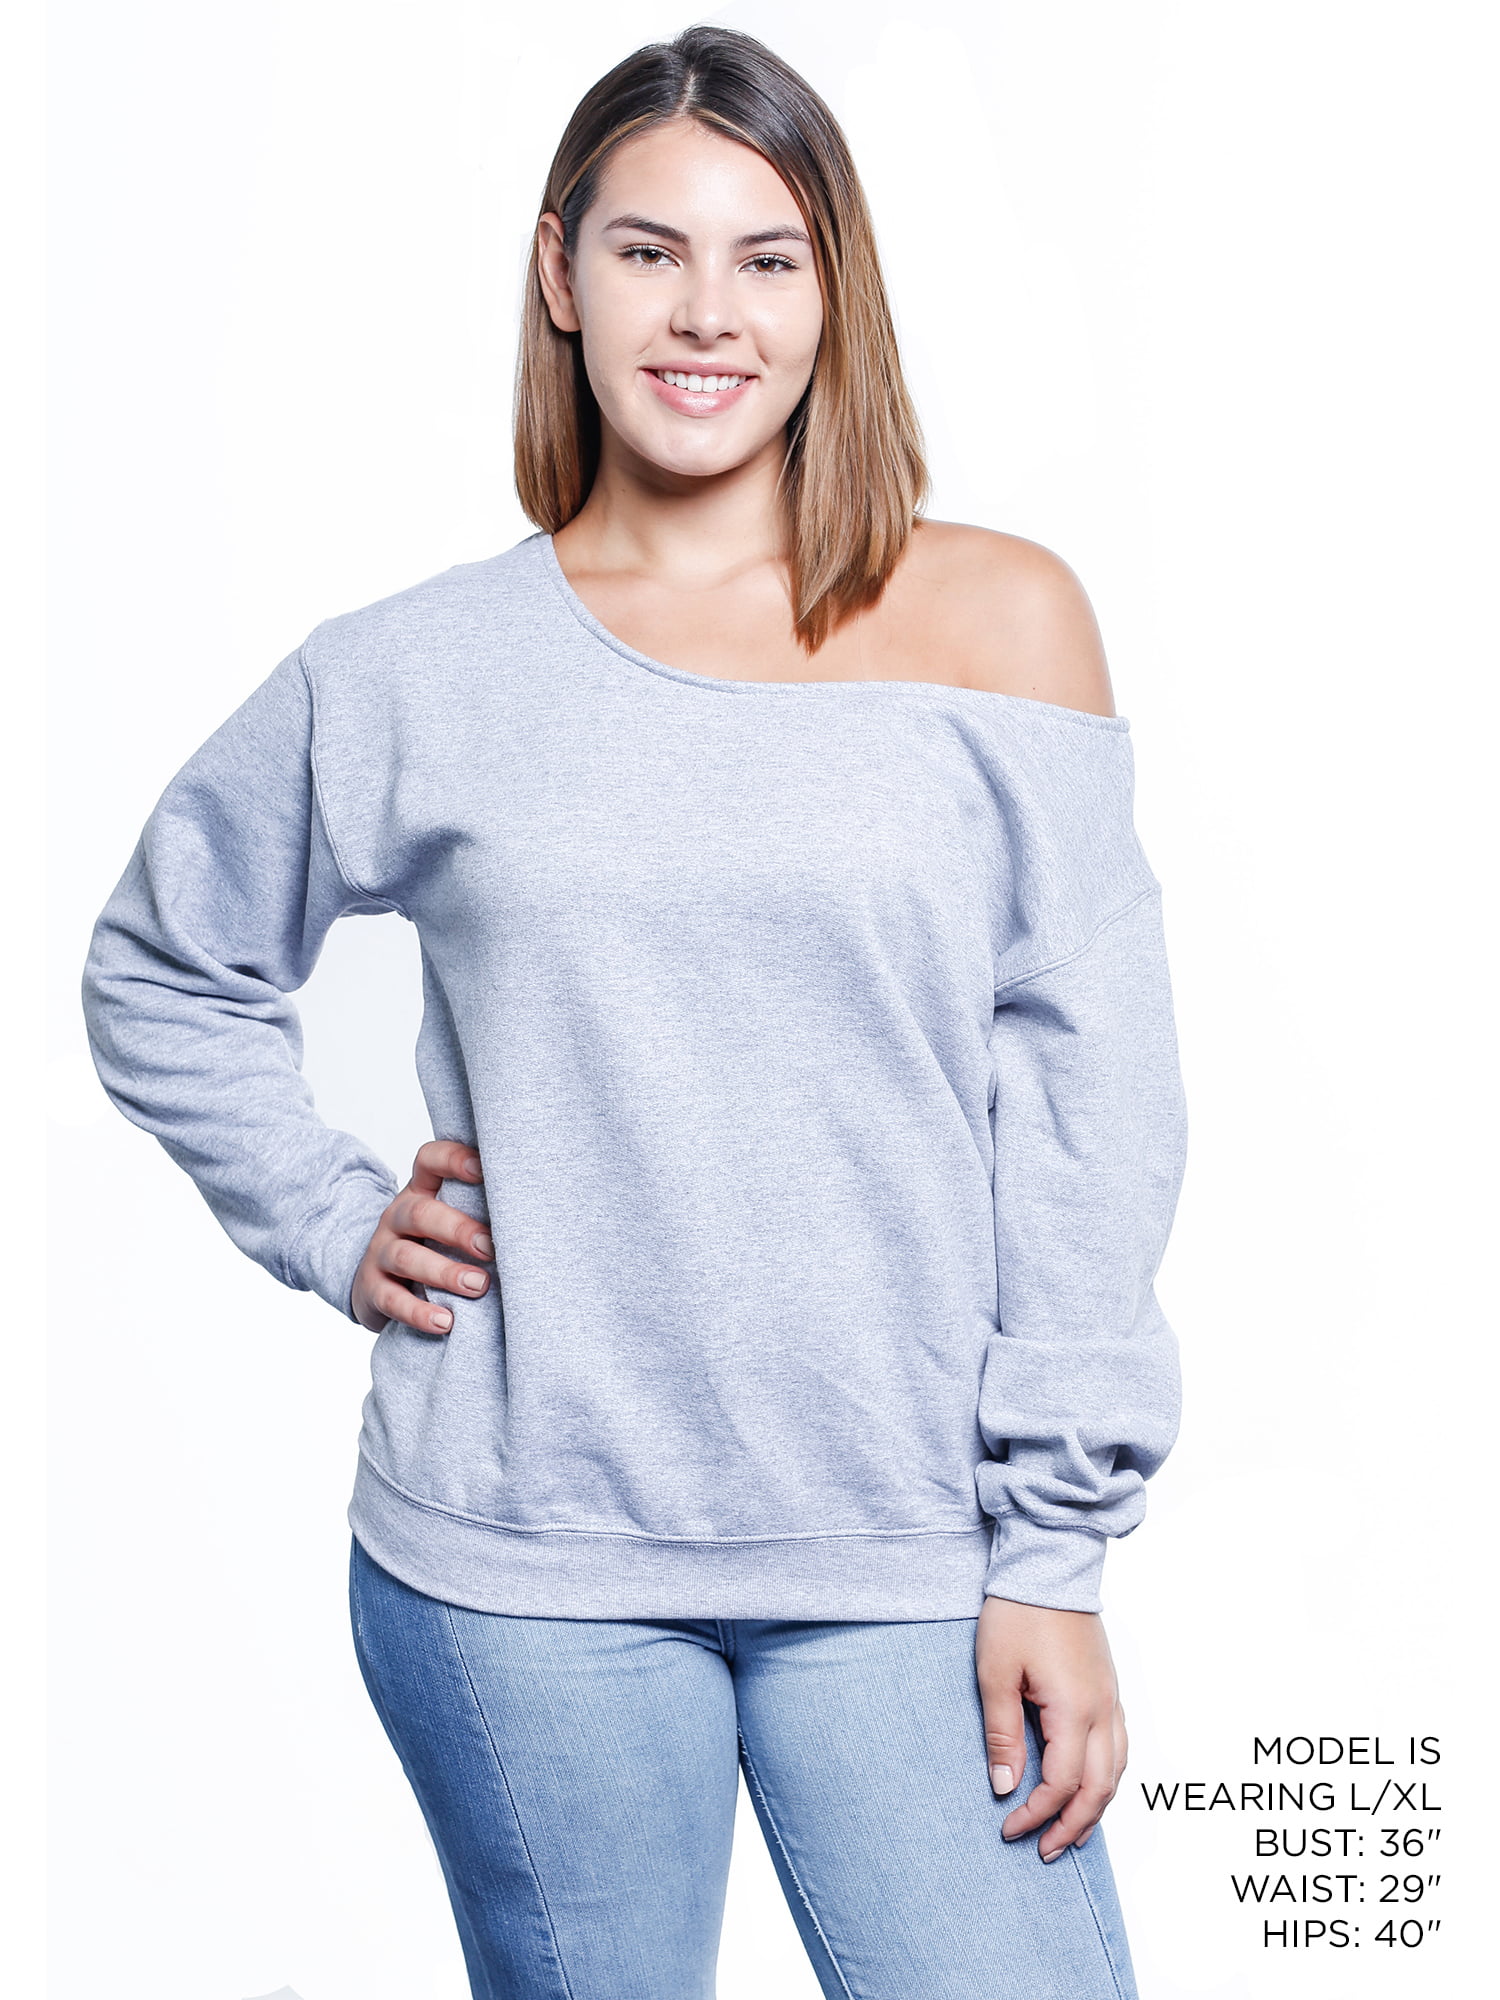 CHUOAND Womens Off The Shoulder Sweater,womens 2x tops plus size clearance, cheap sweatshirtes under 10 dollars for women,sale,cheap stuff under 1  dollar for teens,outlet sales,current orders - Yahoo Shopping